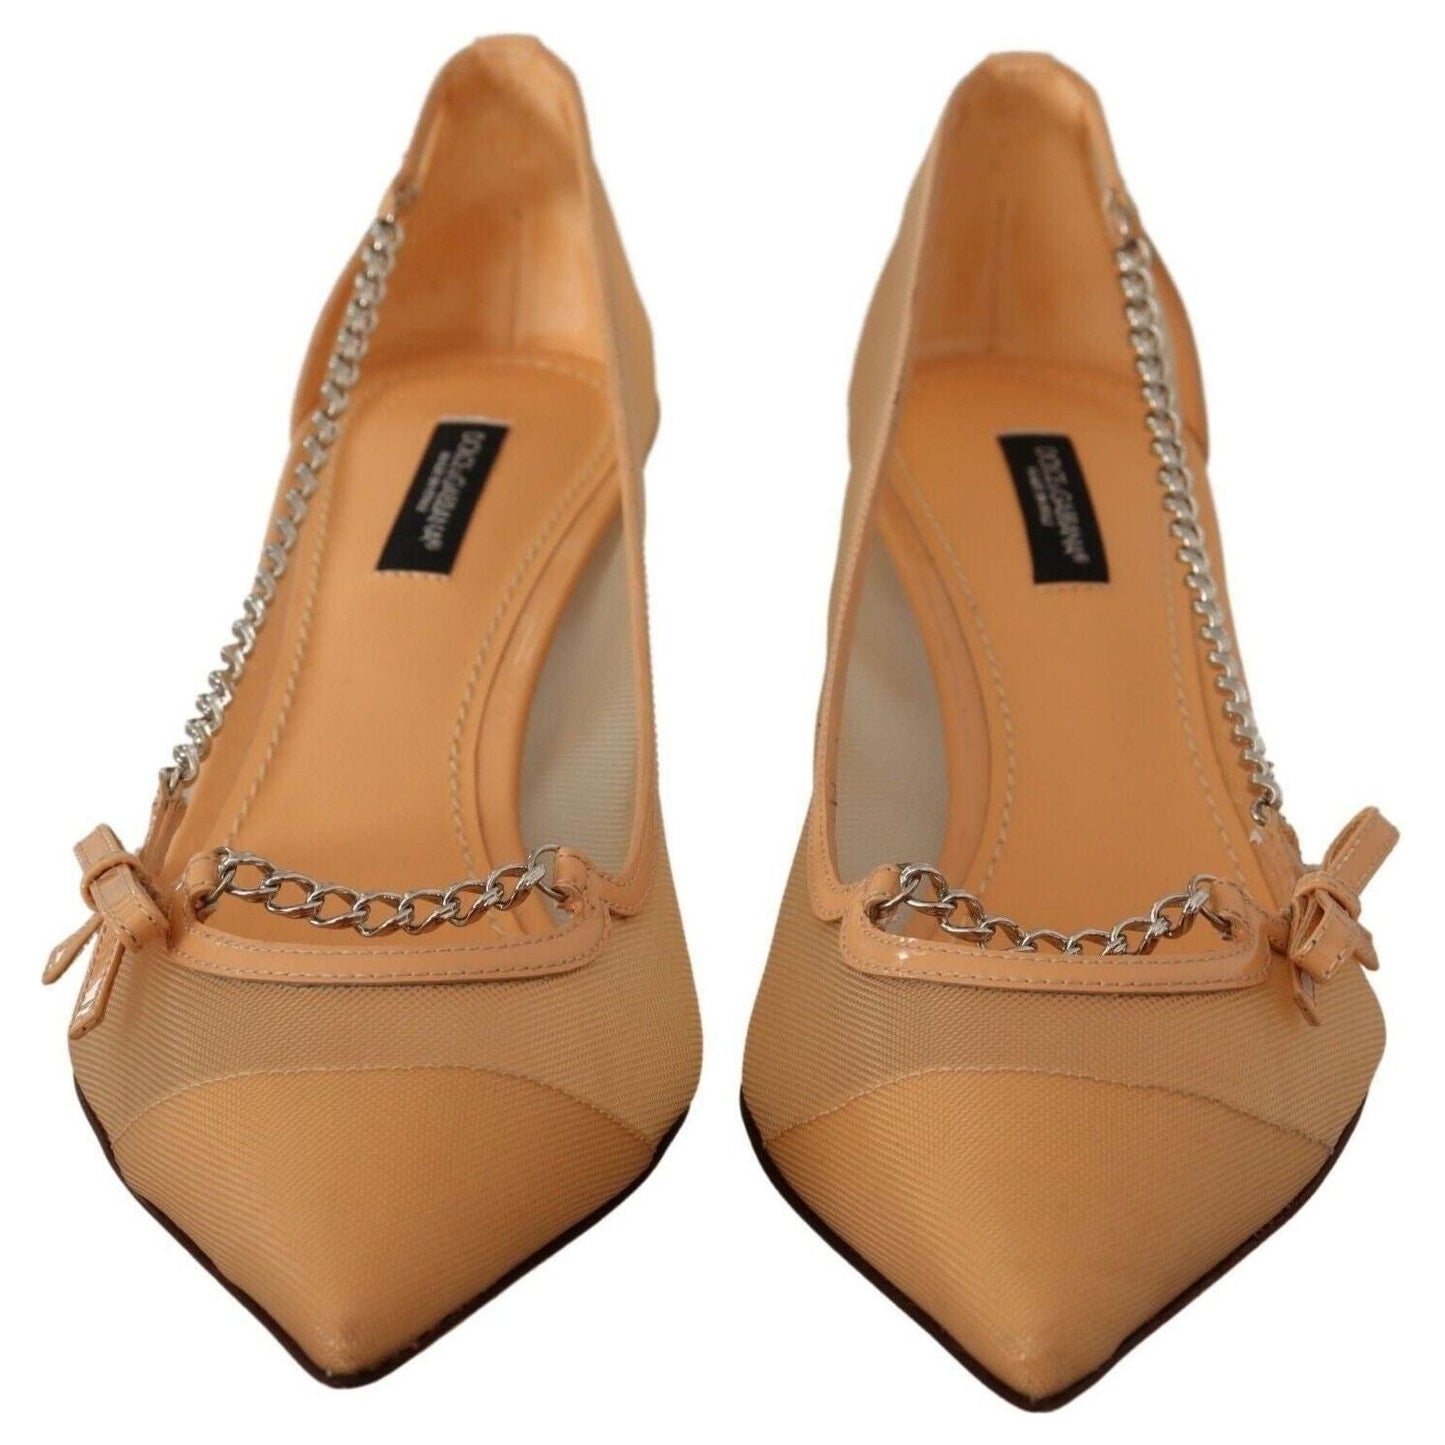 Dolce & Gabbana Elegant Beige Mesh Pumps with Silver Chains peach-mesh-leather-chains-heels-pumps-shoes